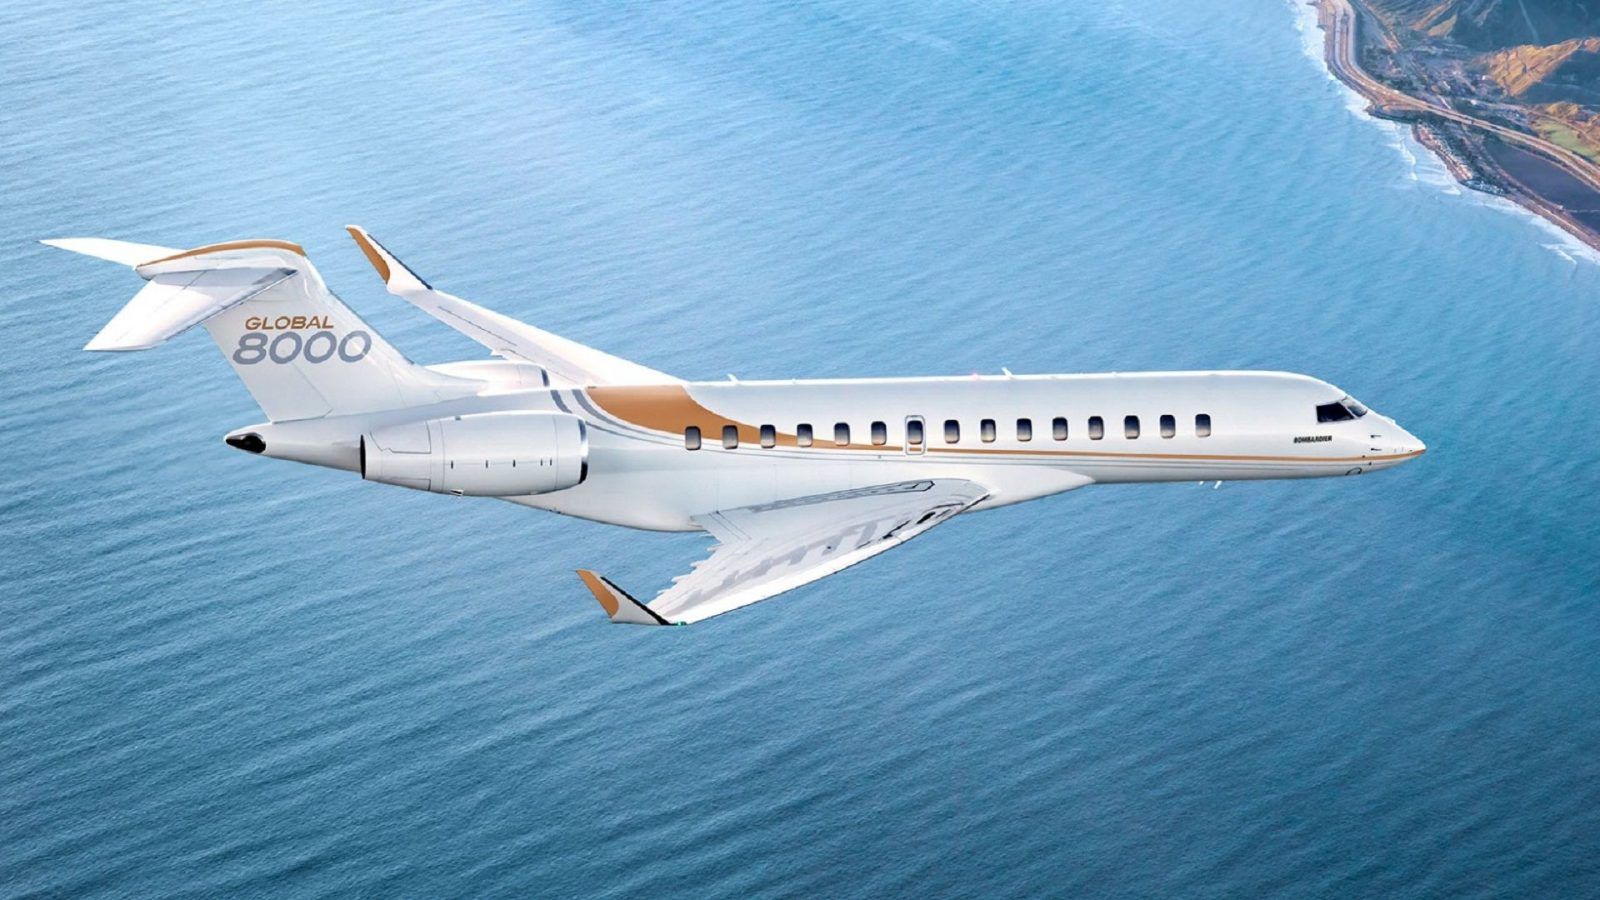 Bombardier introduces the world’s fastest business jet, the Global 8000